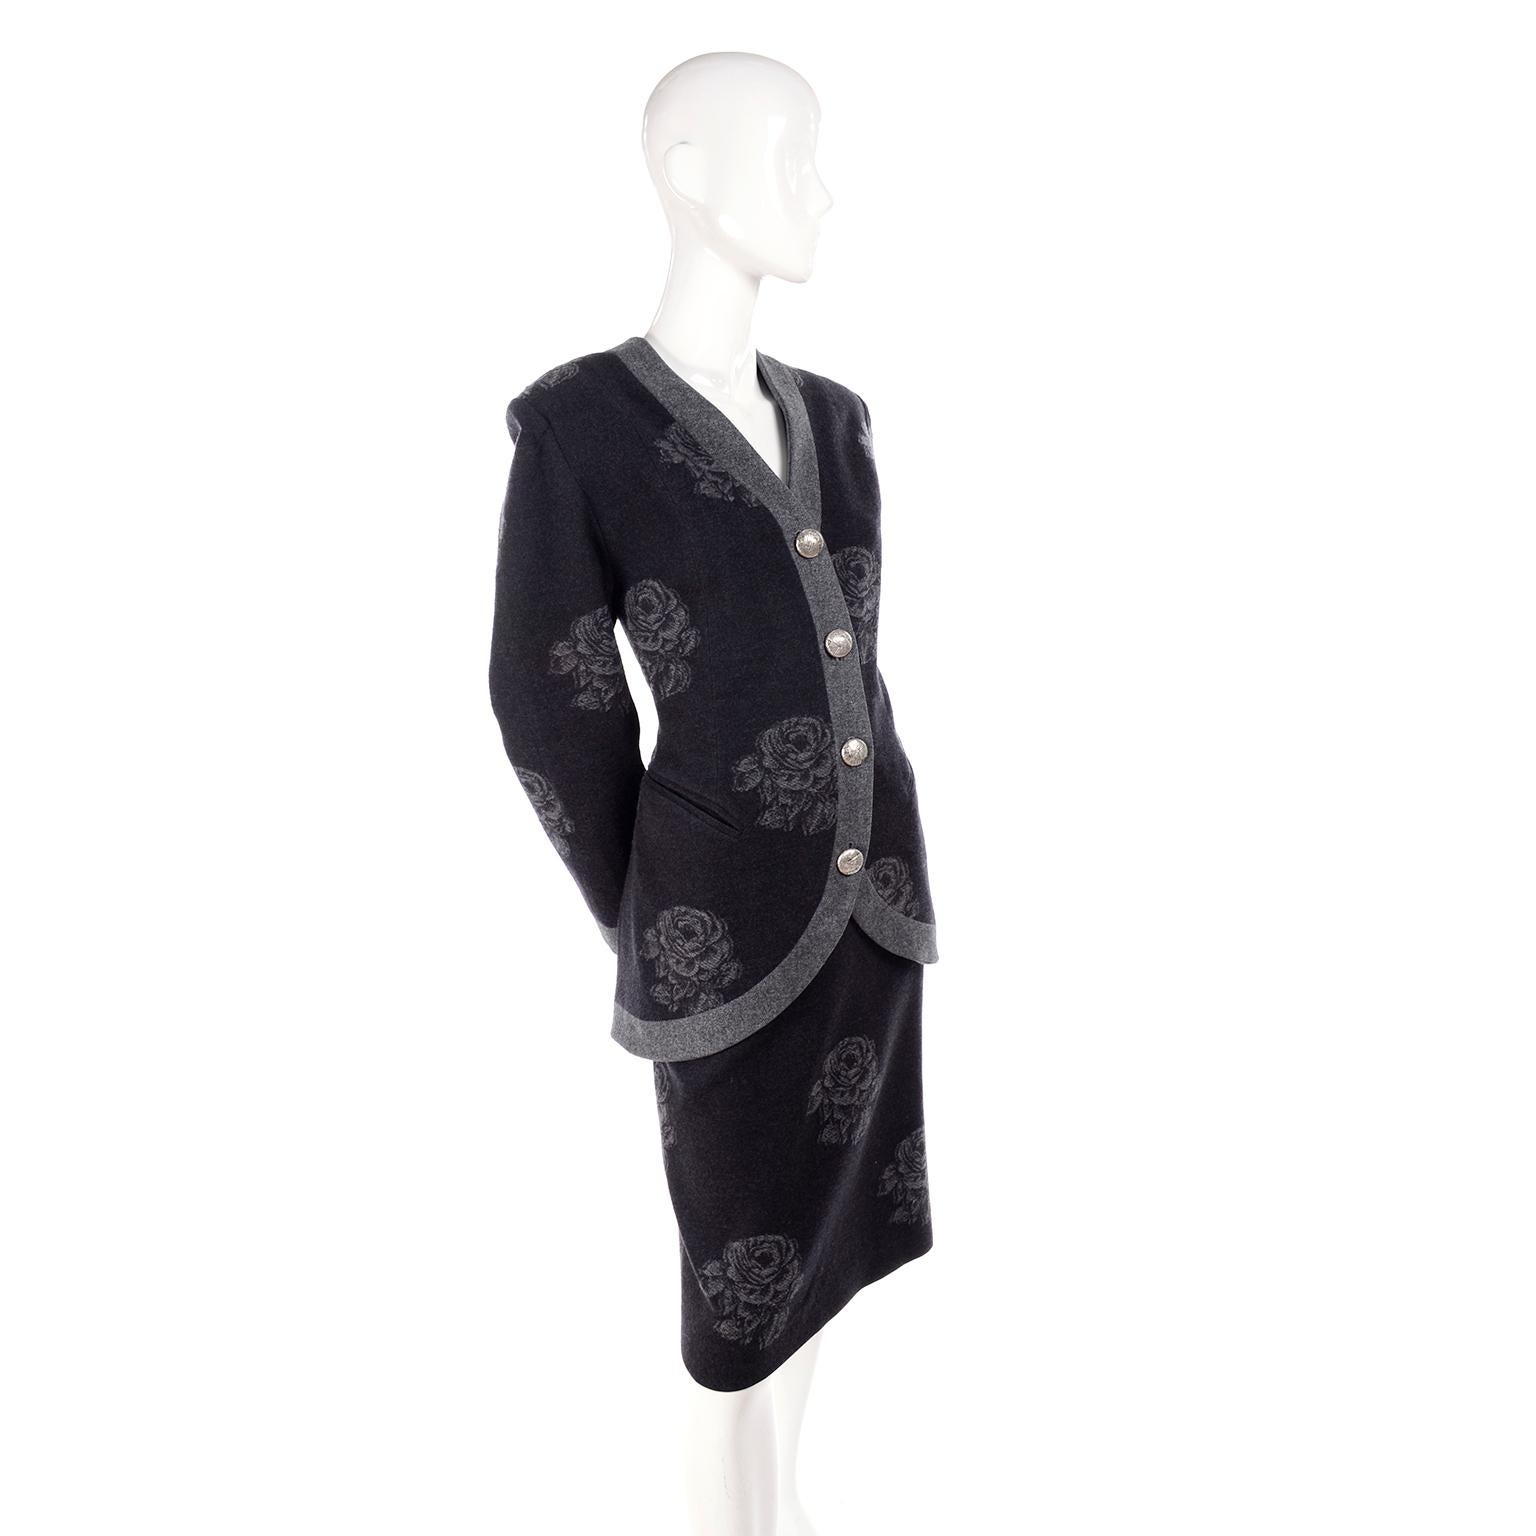 This is a vintage Nina Ricci skirt and jacket suit that is in a gray and black floral printed wool. Made in France, this outfit is so lovely and has so many interesting design elements. The blazer is almost like a structured cardigan and has large